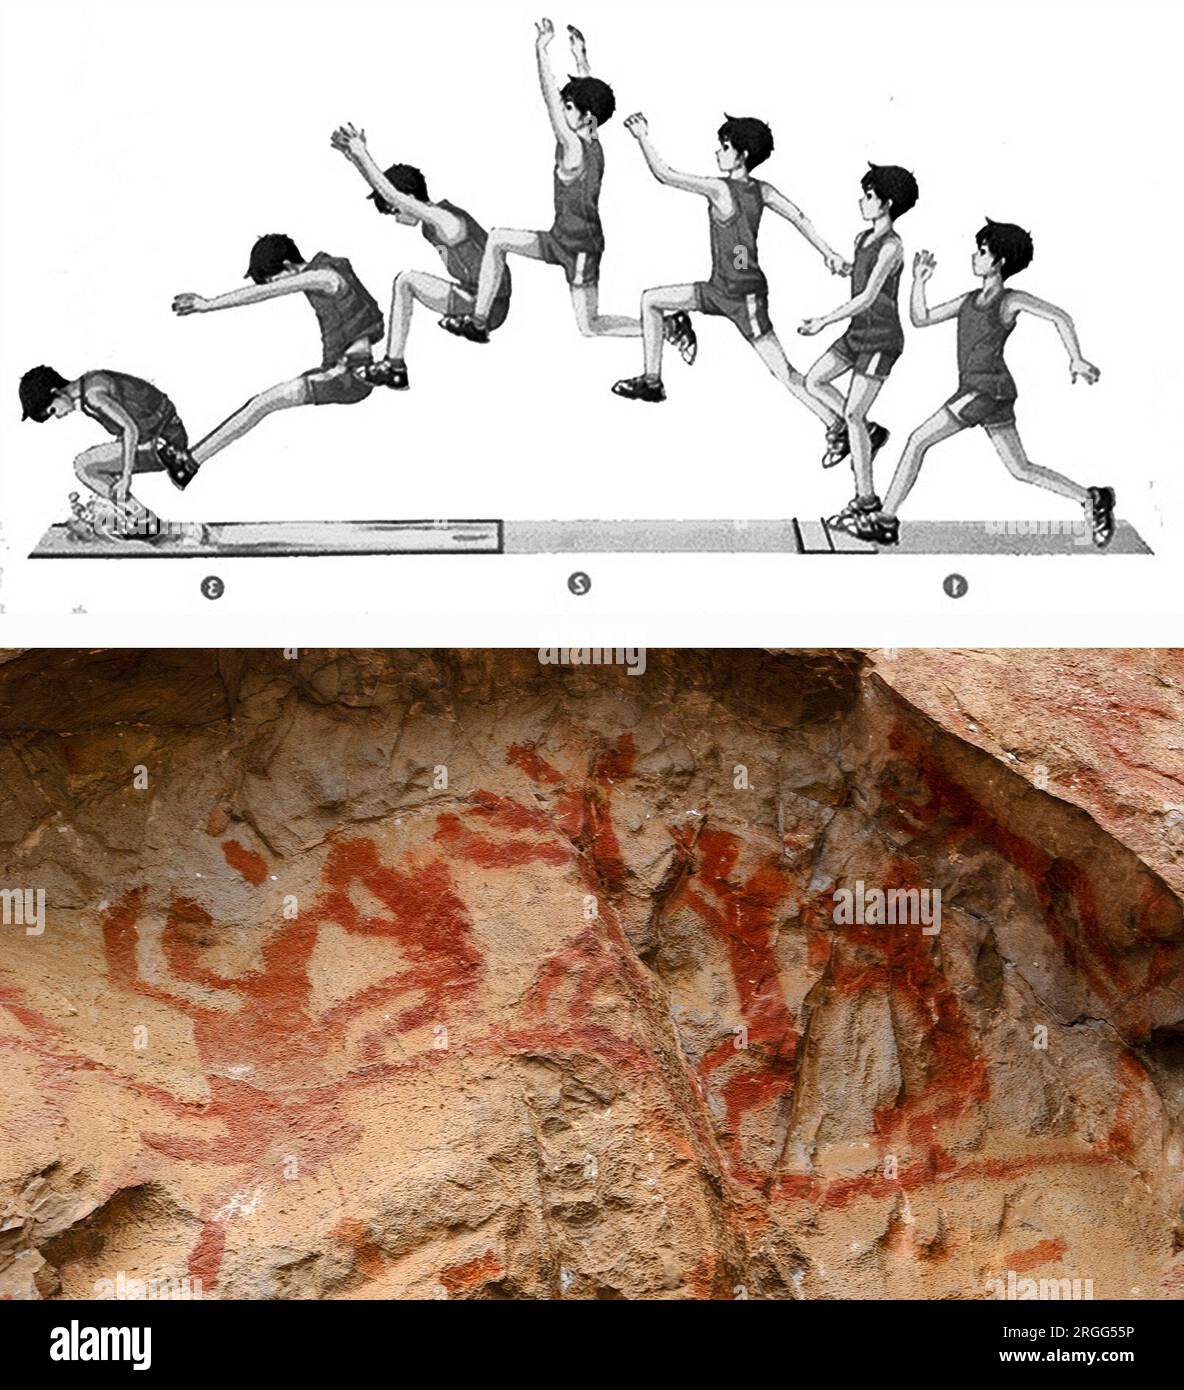 (230809) -- NINGMING, Aug. 9, 2023 (Xinhua) -- This combo photo shows a diagram (above) of the movements of jumping and a Huashan rock painting depicting jumping (photo taken by Xinhua photographer Fei Maohua on Aug. 8, 2023) in Ningming County, Chongzuo City, south China's Guangxi Zhuang Autonomous Region. The Zuojiang Huashan site is home to more than 1,900 well-preserved drawings on the face of the Huashan mountains along the Zuojiang River and its tributary Mingjiang River in Chongzuo.   The brownish red paintings, created from the Warring States Period (475-221 BC) to East Han Dynasty (25 Stock Photo